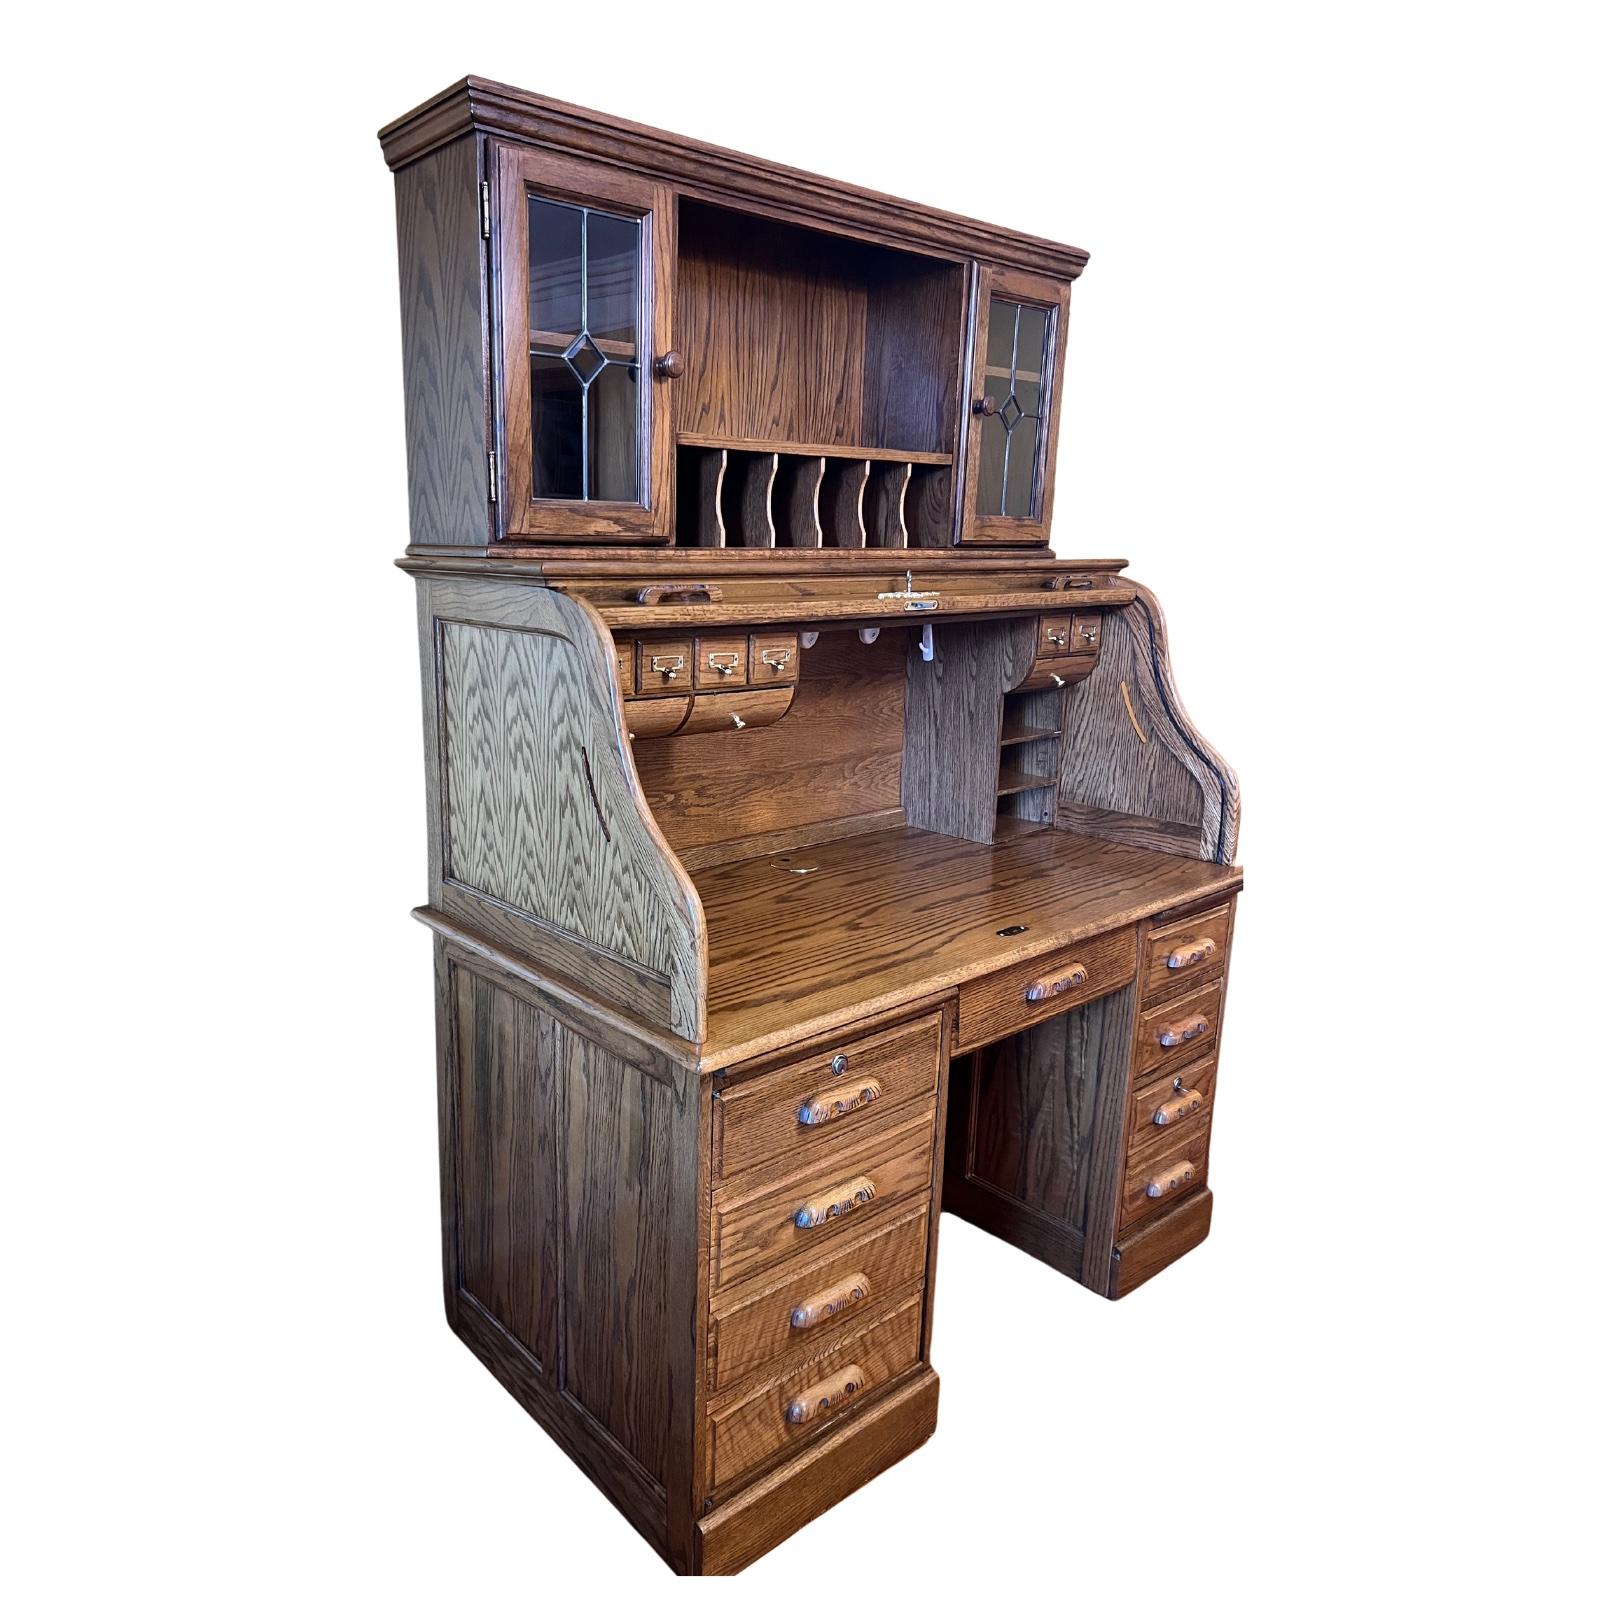 Made in American this reproduction of an antique style desk has all the bells for modern day use but looks like an antique, comes with keys to both roll top and below drawers, desk has 9 small drawers with 2 consoles, bottom of desk has one side